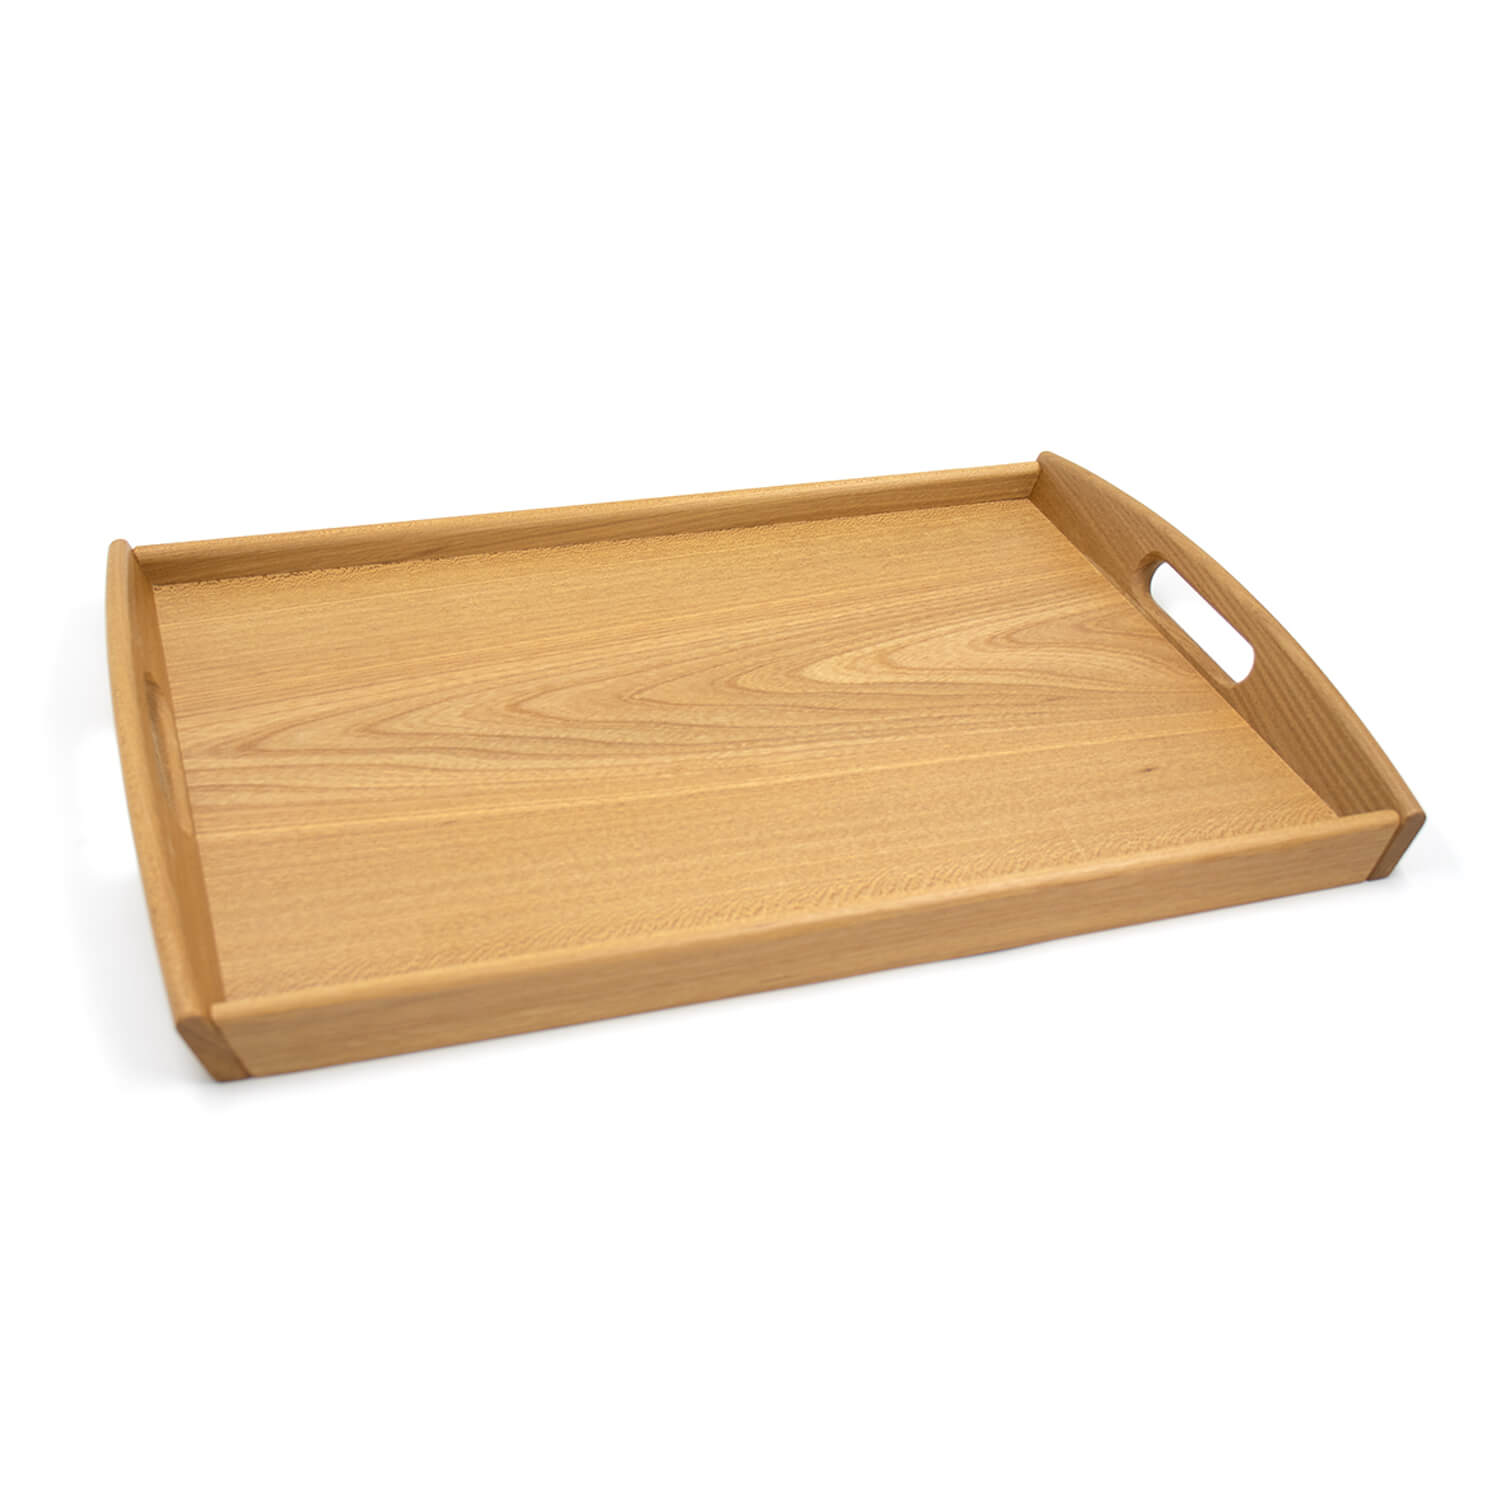 Multi-tray with handle that can be used as interior decoration 515mm